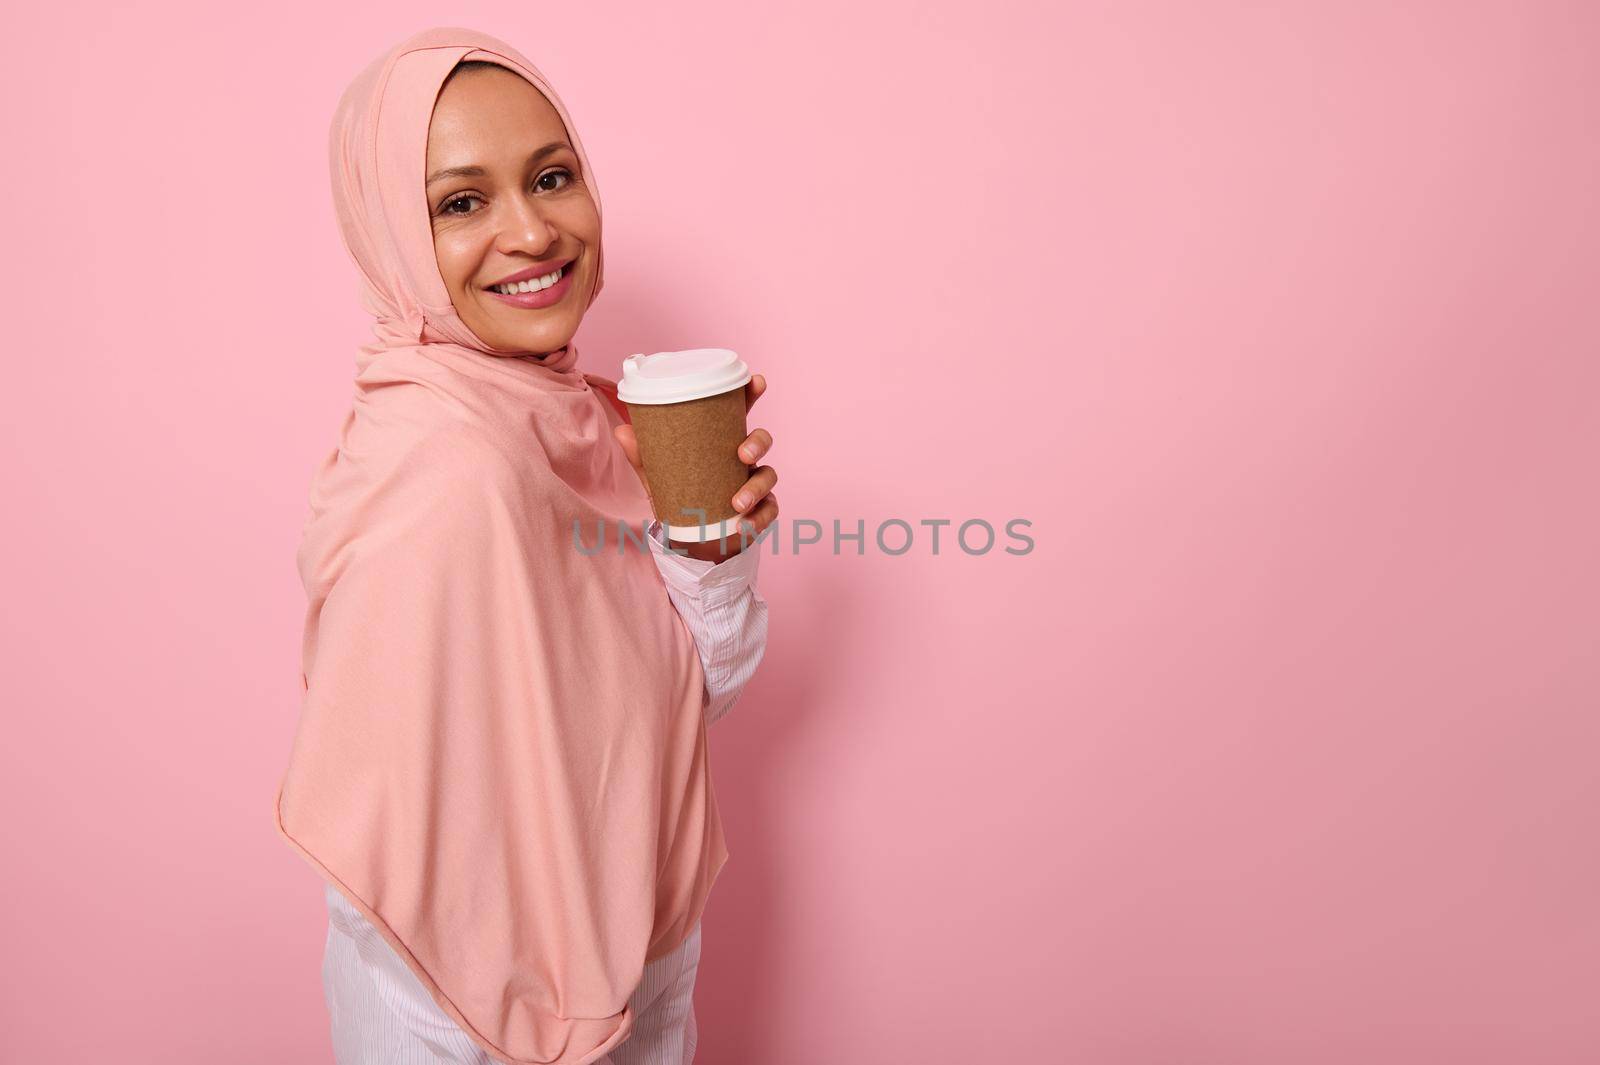 Arabic muslim beautiful woman with covered head in hijab stands three quarters against pink background with takeaway cup from disposable cardboard of hot drink, smiles looking at camera. Copy space by artgf